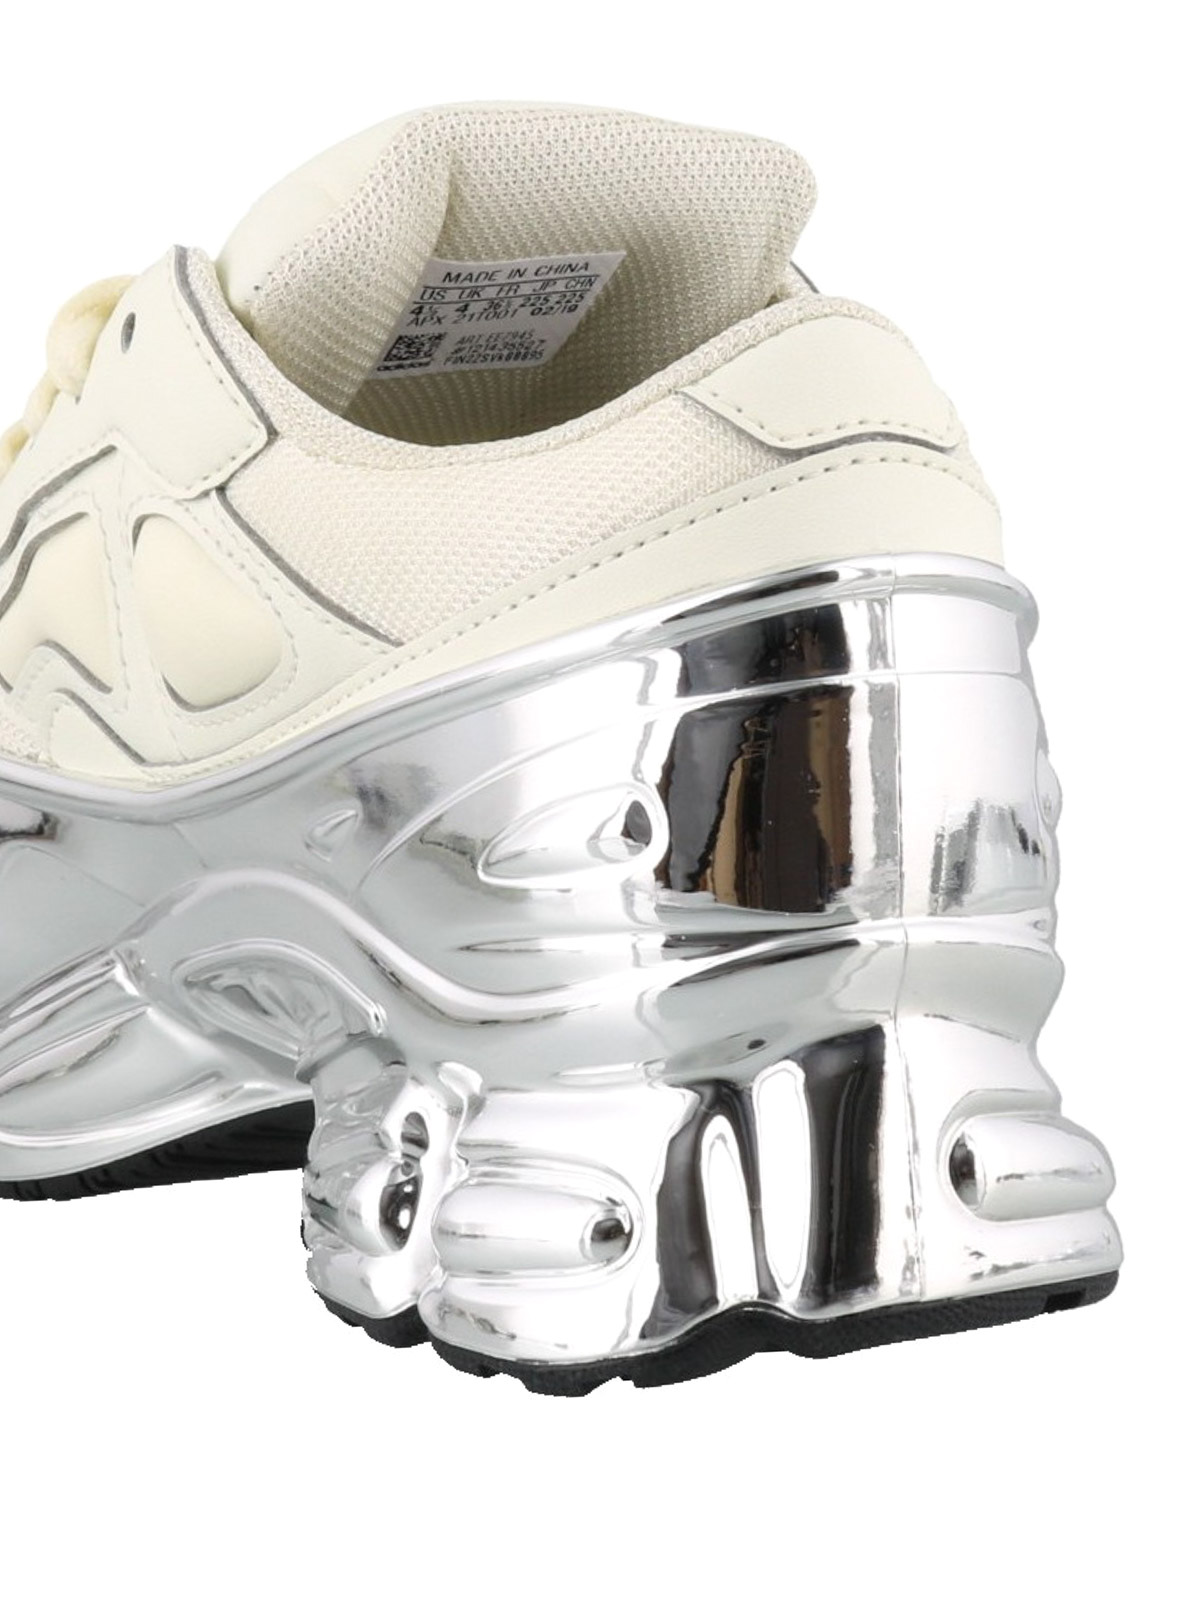 Trainers Raf Simons Adidas - Ozweego and silver chunky sneakers - EE7945WHITESILVERSILVER